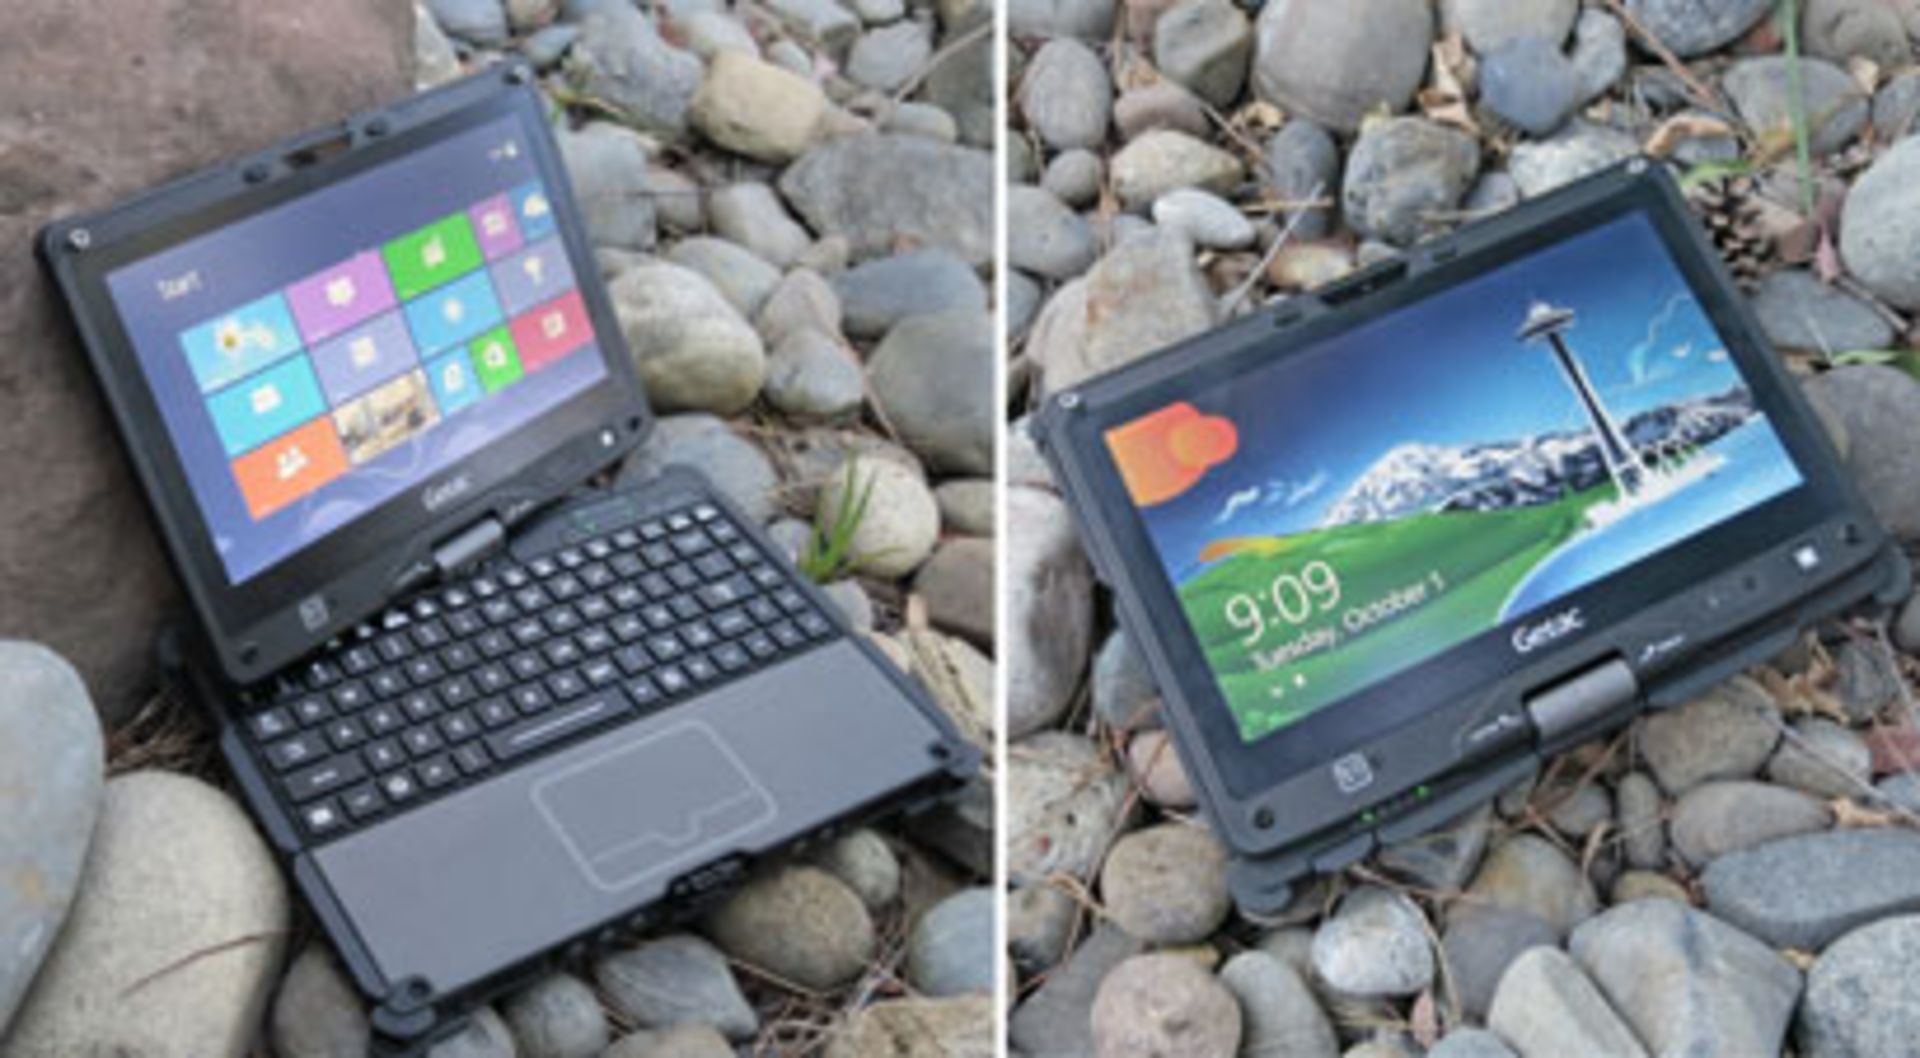 1 x Getac V200 Rugged Laptop Computer - Rugged Laptop That Transforms into a Tablet PC - Features an - Image 7 of 15